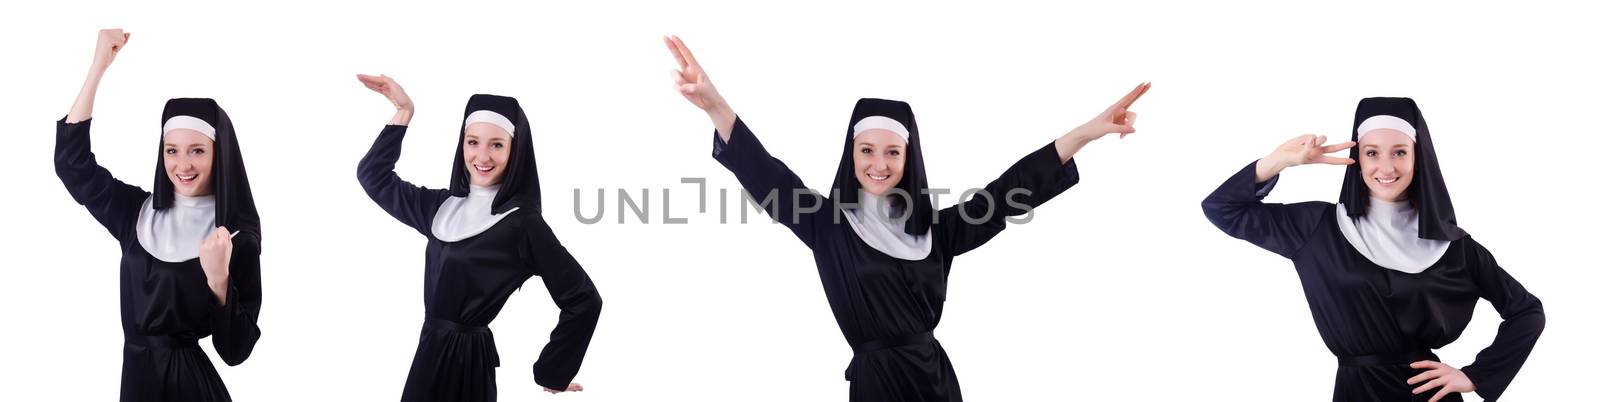 Nun isolated on the white background